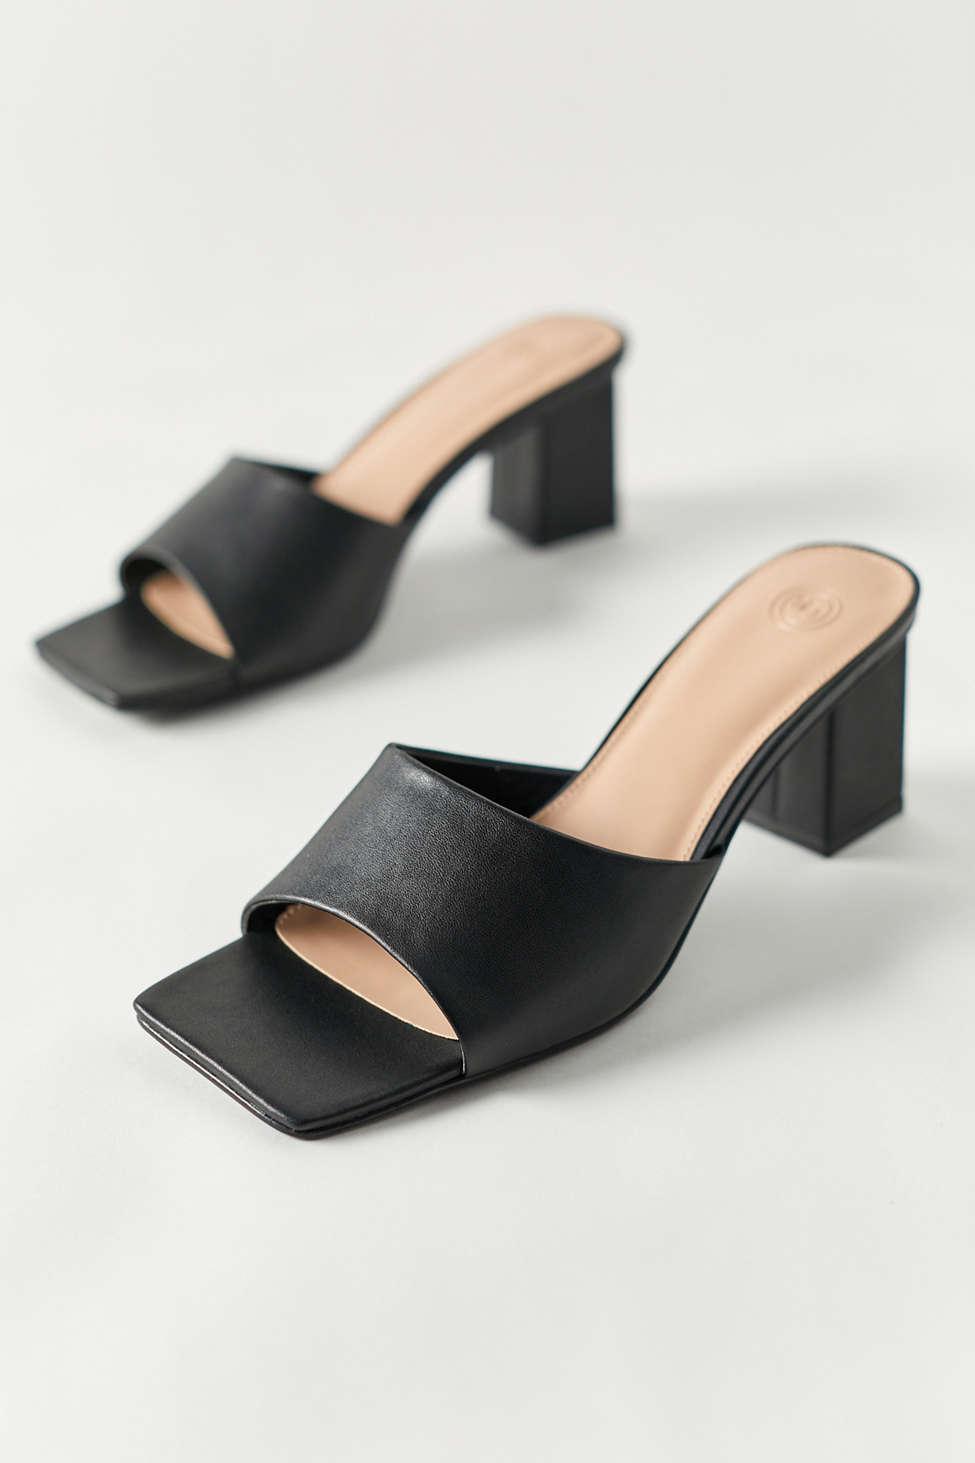 Urban Outfitters Uo Cici Square Toe Mule Sandal in Black | Lyst